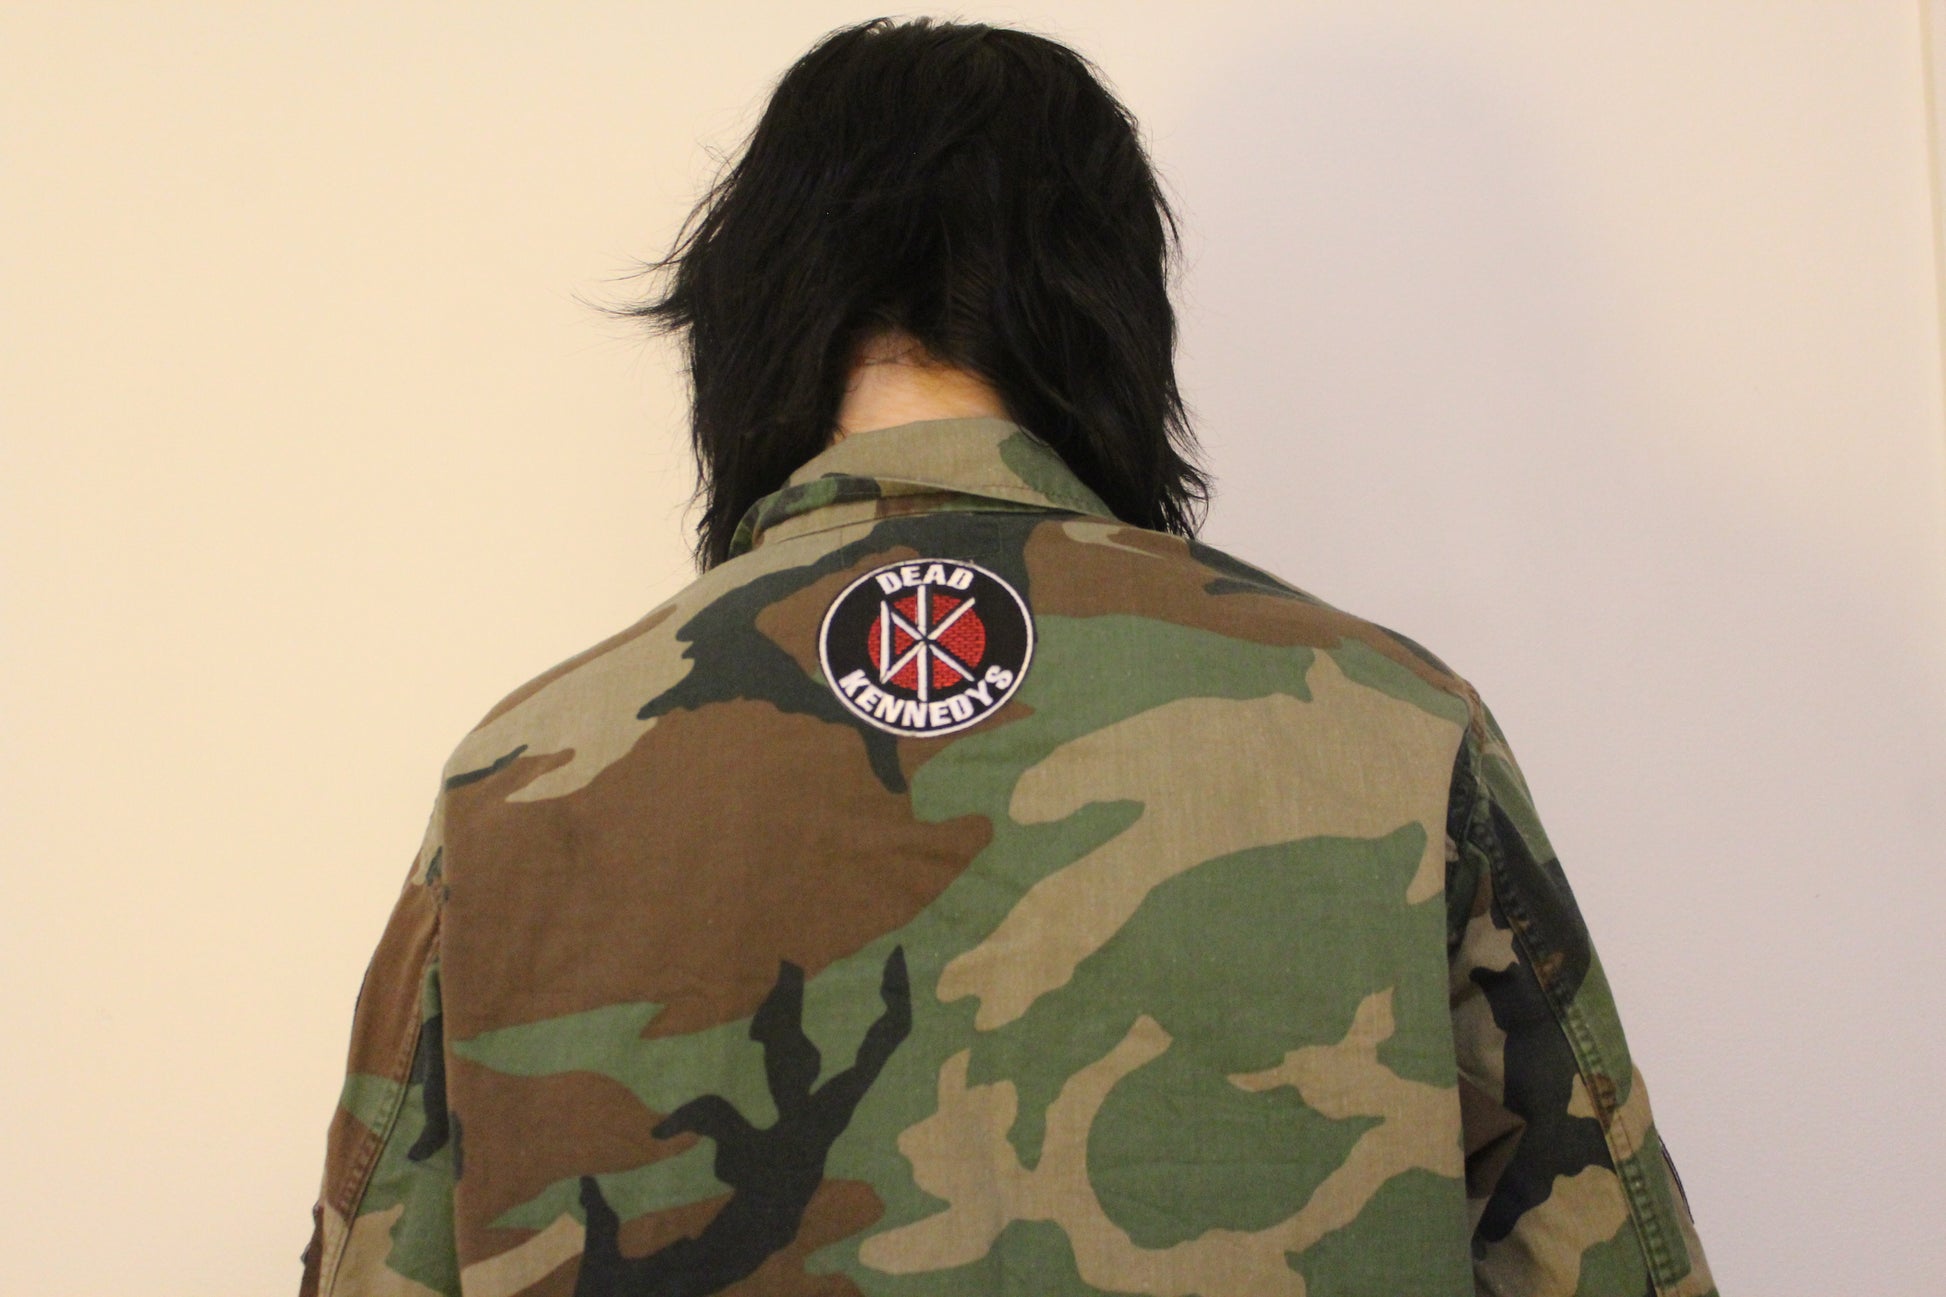 Upcycled Camo Jacket With Patches / Reworked Vintage Military Camo Jacket With Patches Size S Unisex Adult